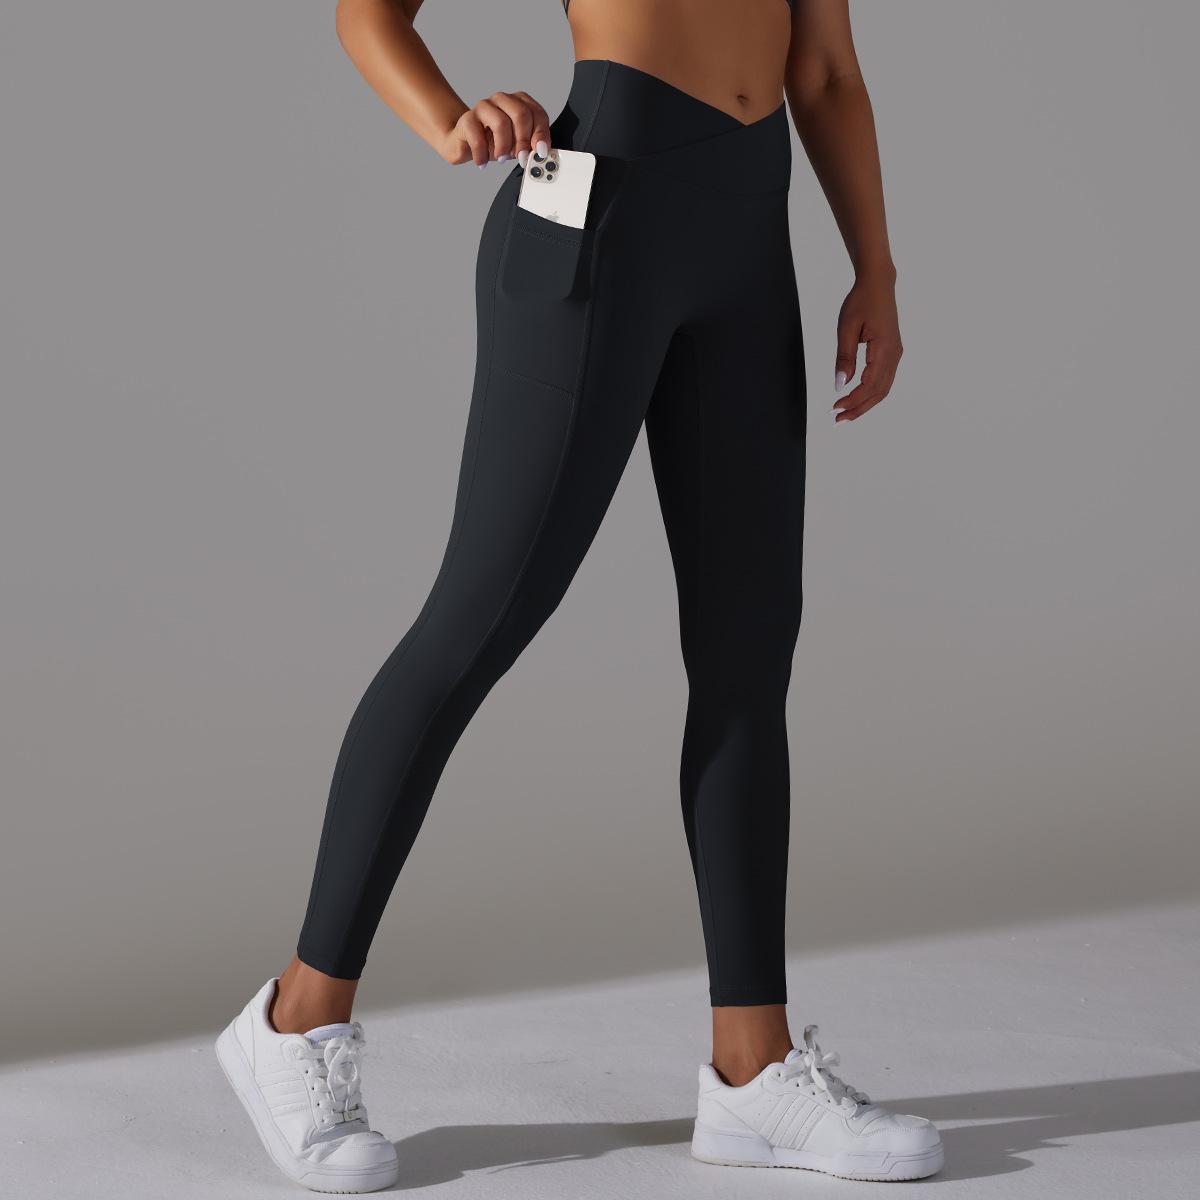 Nothing Else Matters Cross Waist With Pocket Yoga Pants - Light